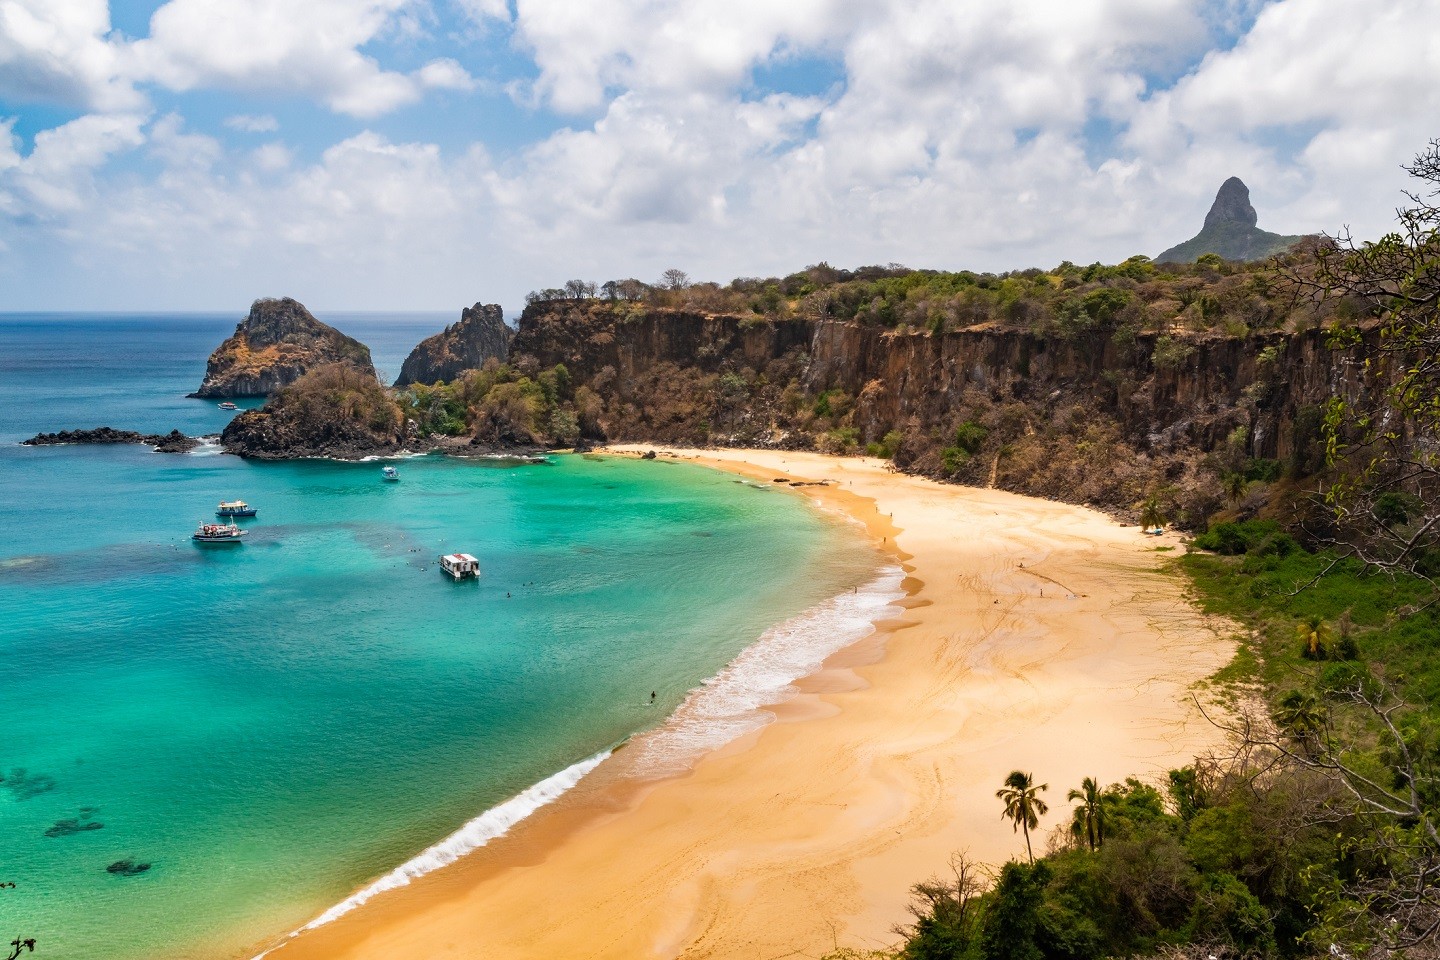 From the Golfinho-Sancho trail, it is possible to not only see the famous Sancho beach, and some of the slightly over 200 steps on the eastern side, but also see two of the more famous landmarks of Fernando de Noronha: O Pico, which is the highest point,  (Foto: Getty Images)